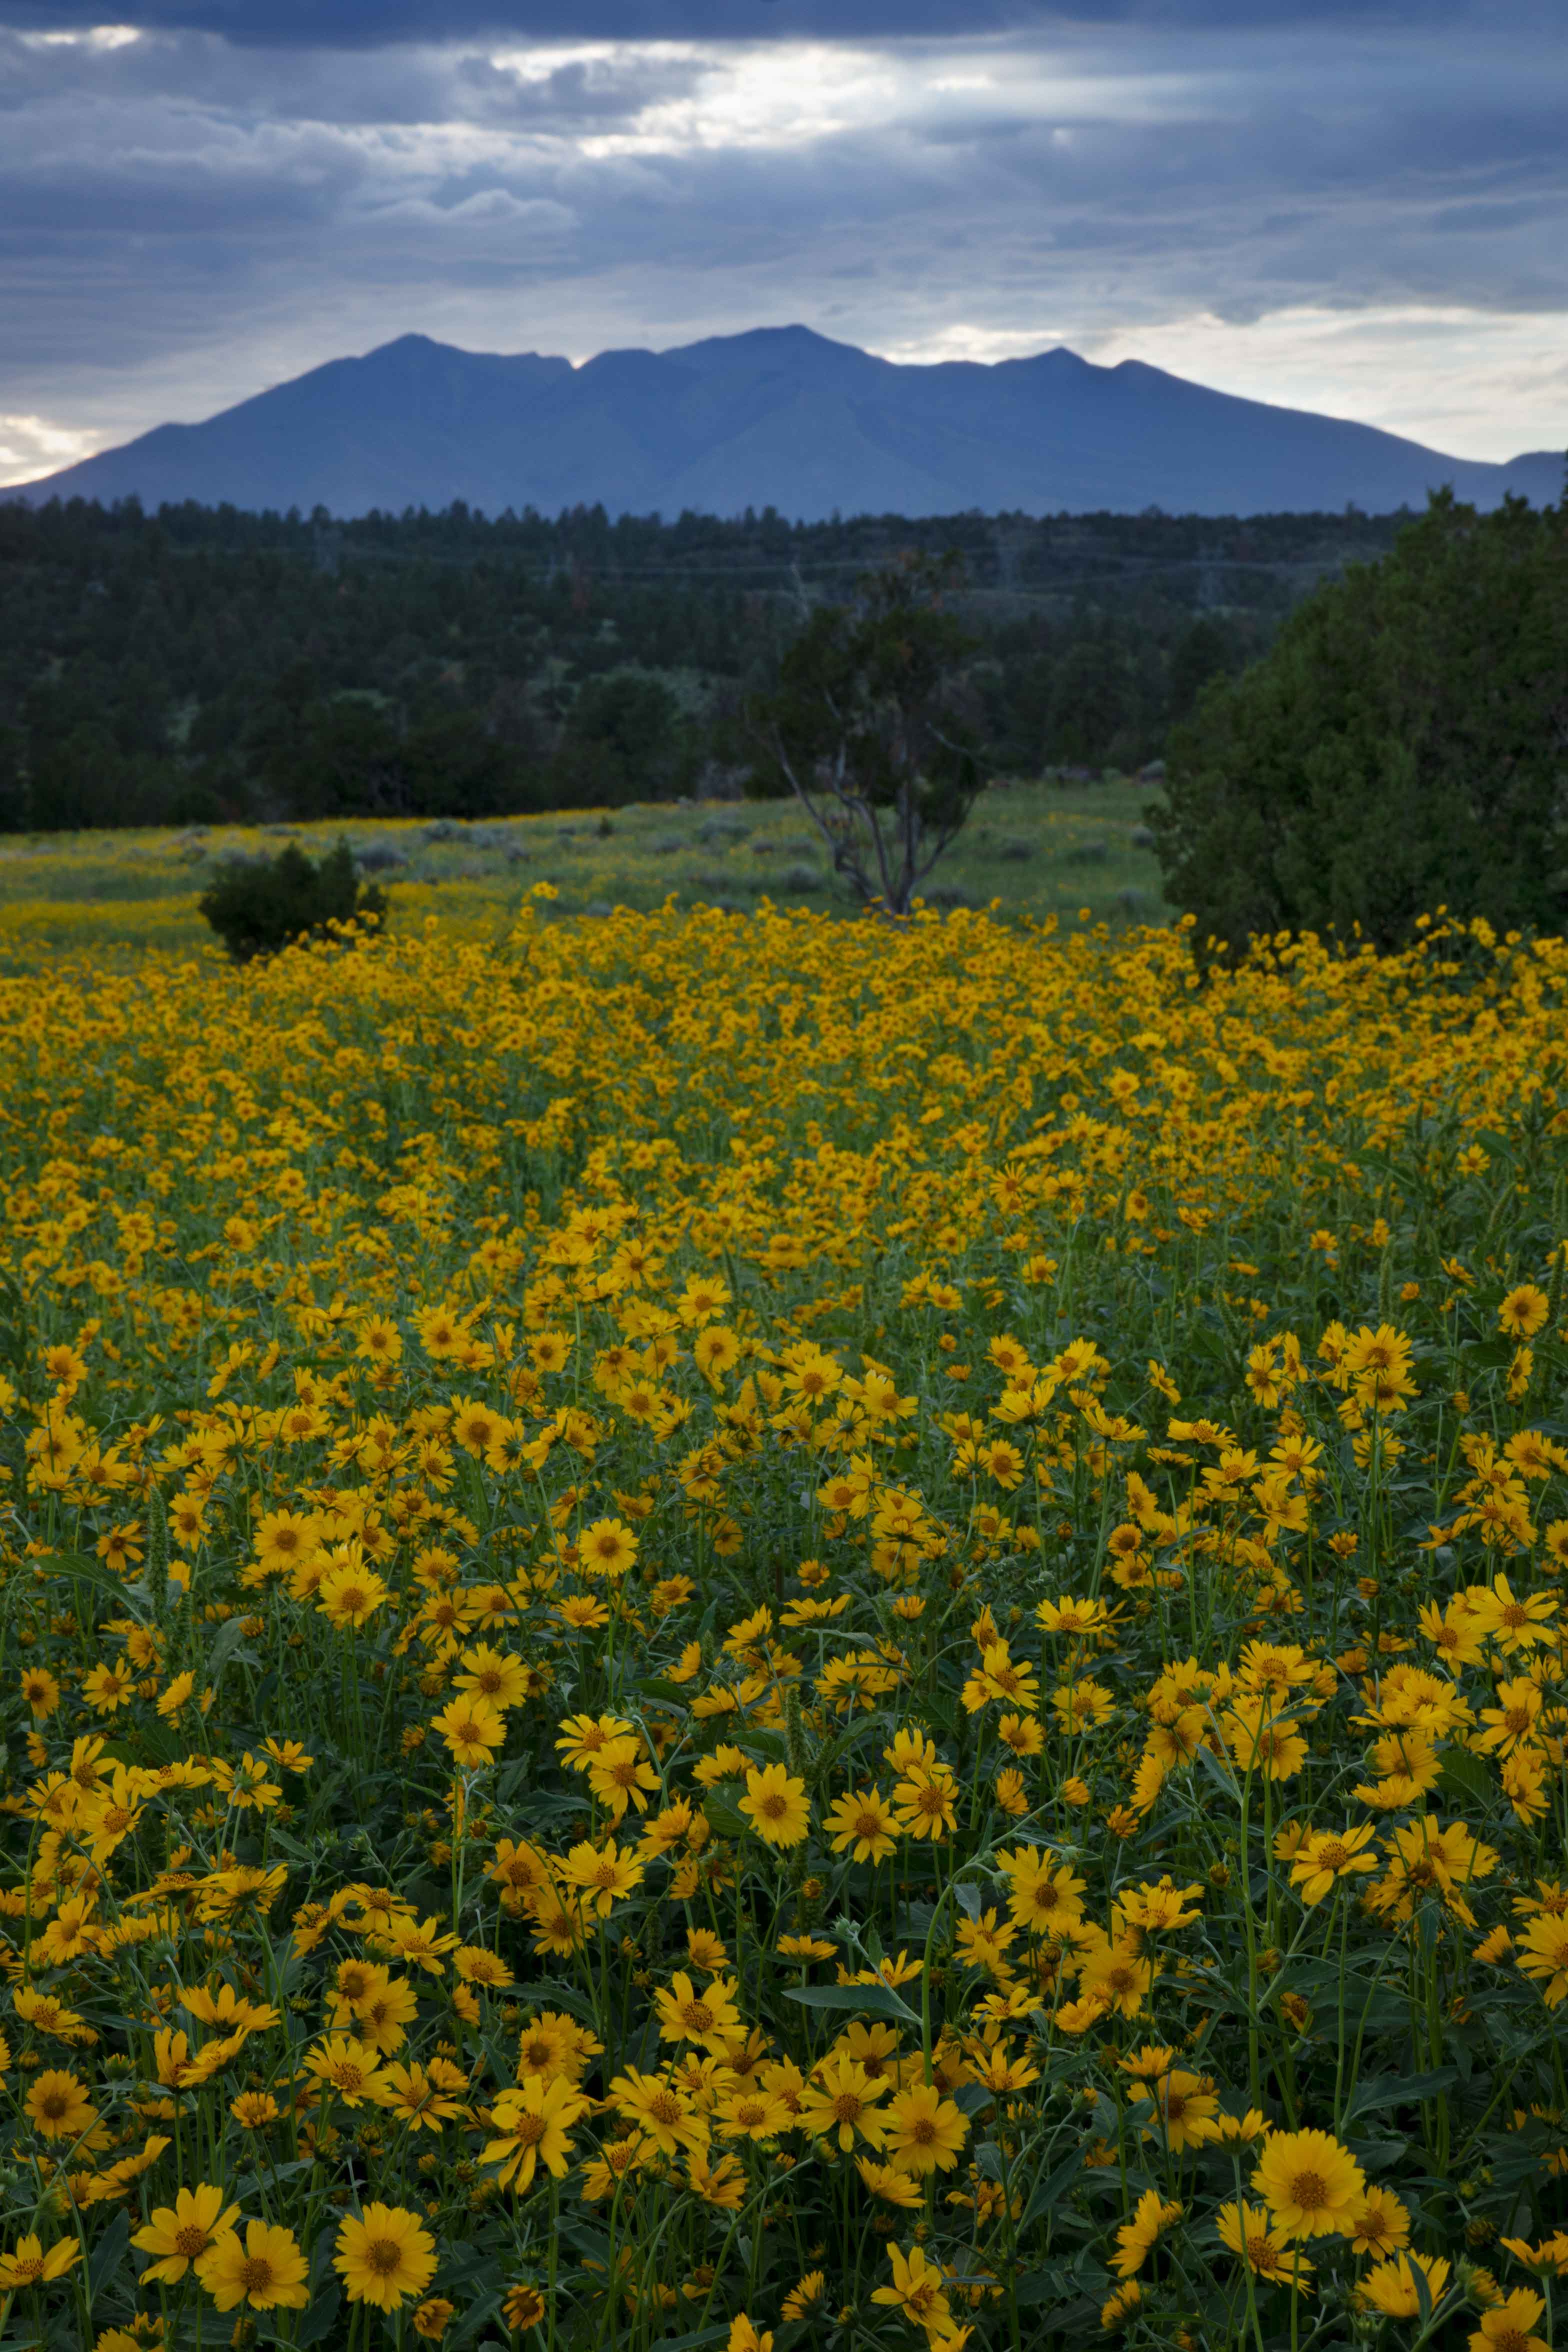 Goldeneye wildflowers in the Cinder Basin with the San Francisco Peaks in the distance.